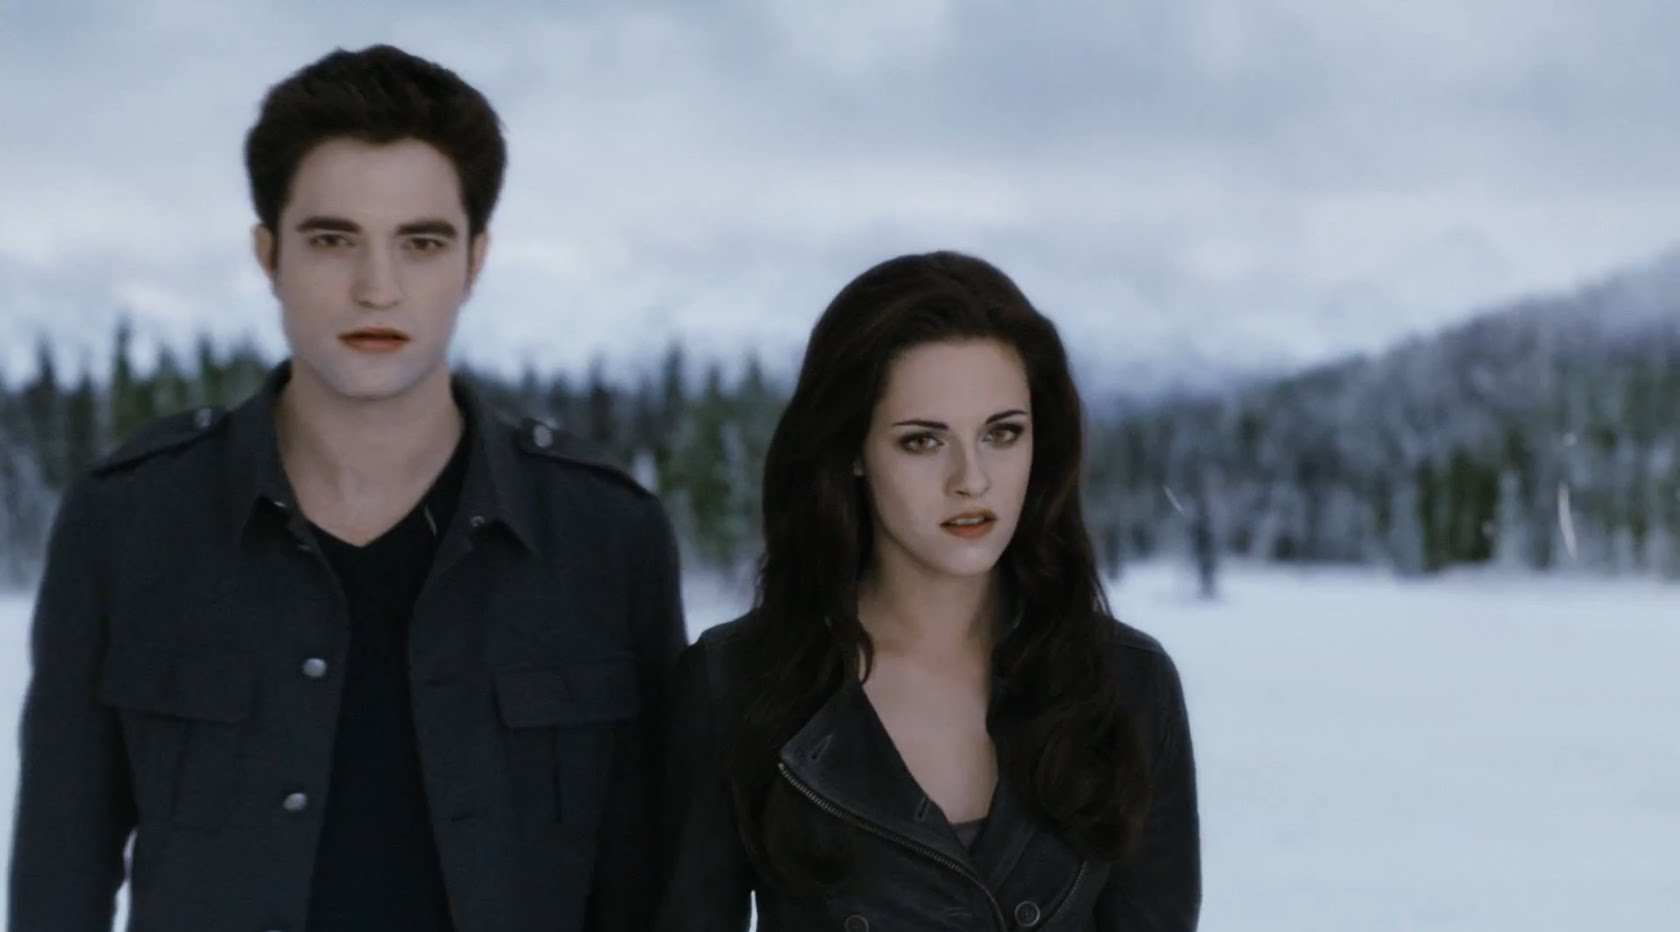 The Twilight Saga: Breaking Dawn, Part 2 for android instal